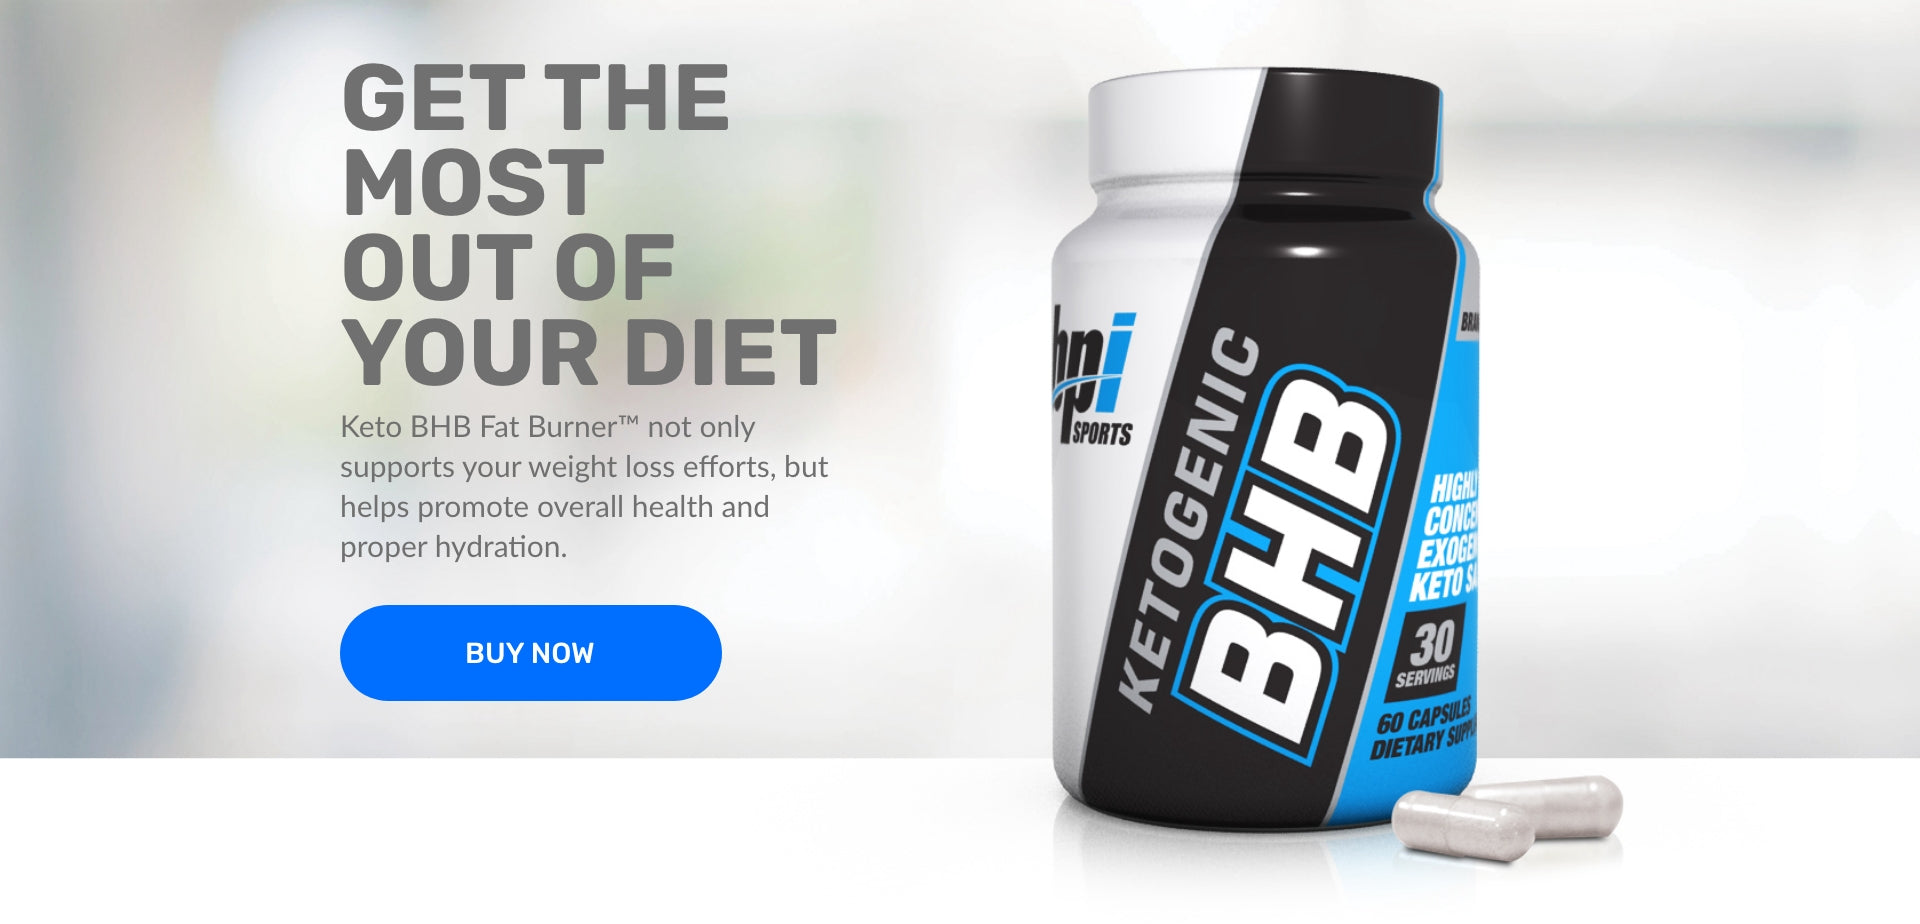 Get the most out of your diet with KETO BHB